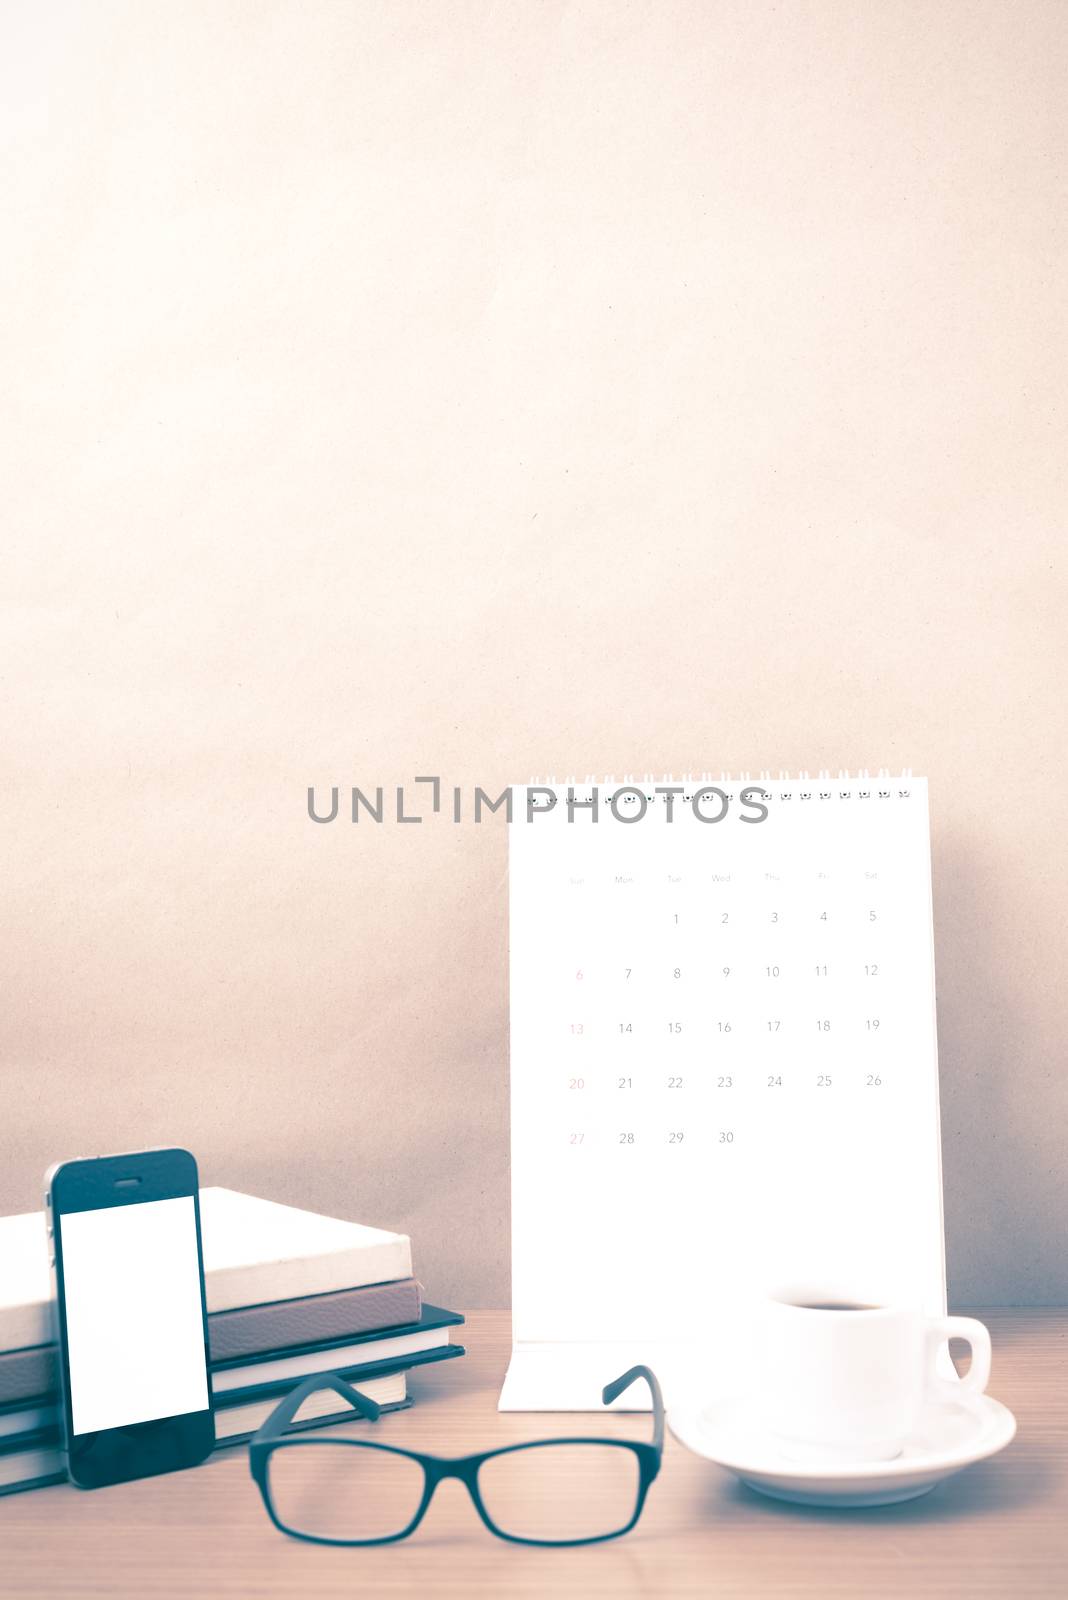 coffee,phone,eyeglasses,stack of book and calendar on wood table background vintage style